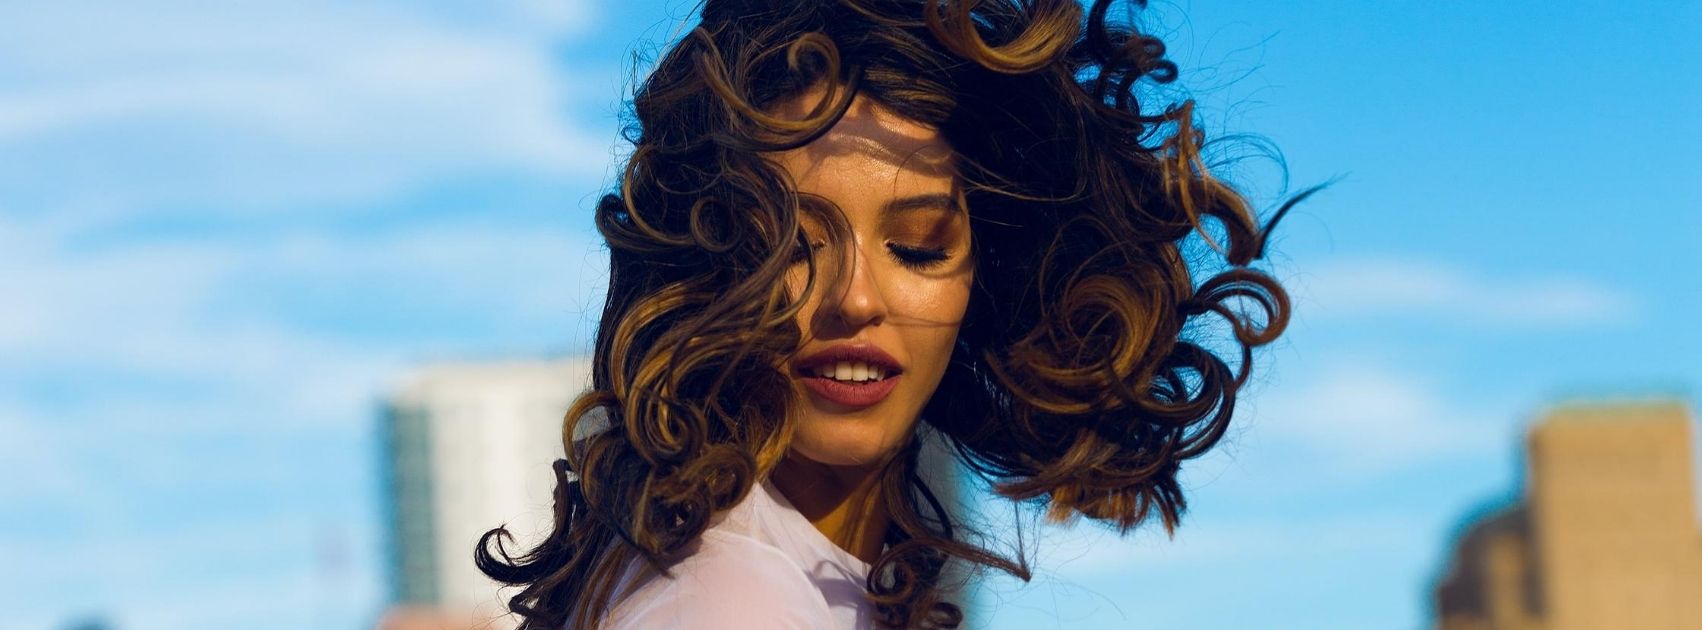 curly haired woman standing outside with windblown hair